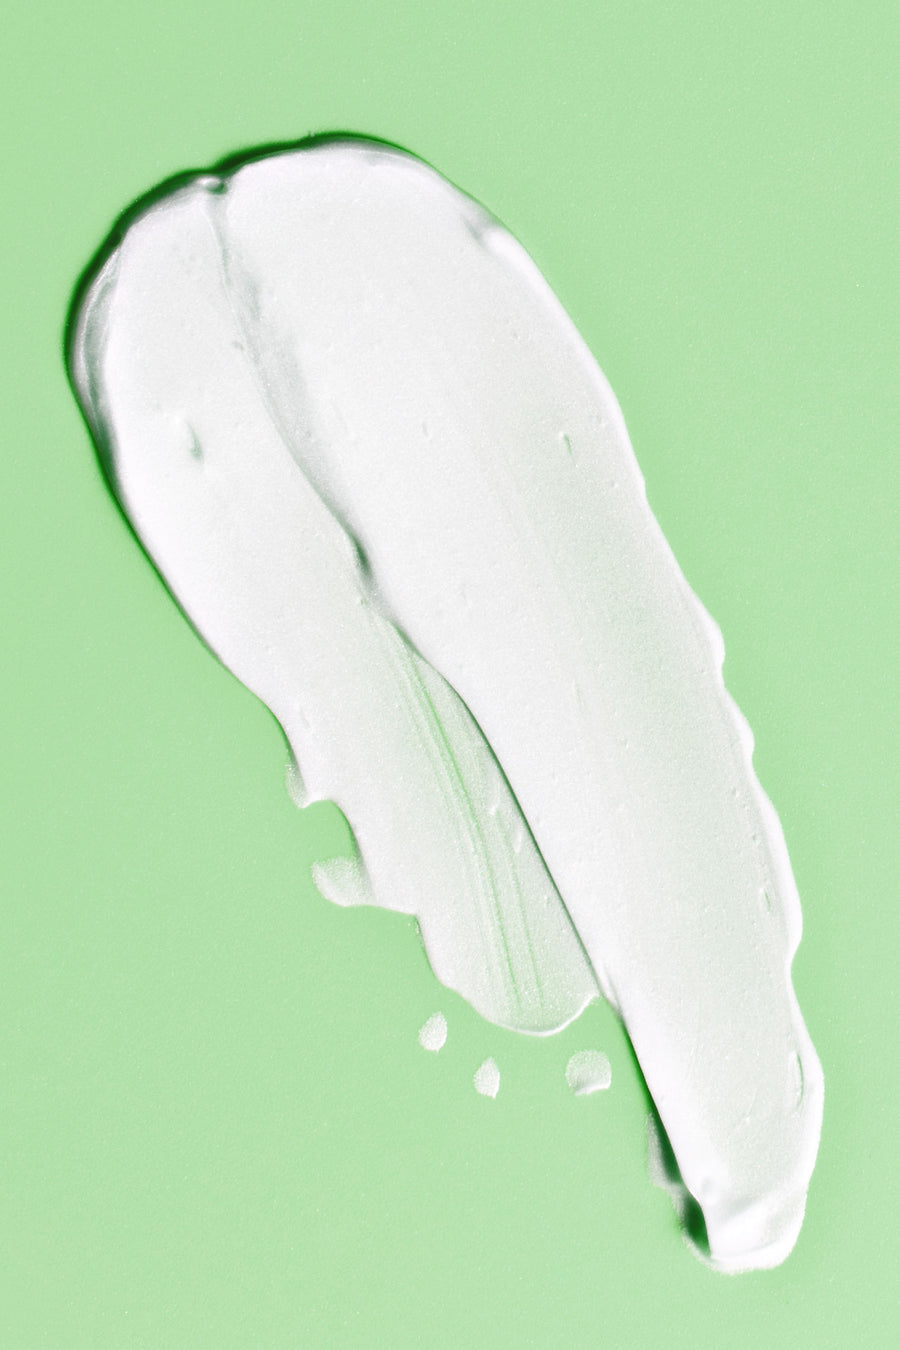 lotion smear on green background